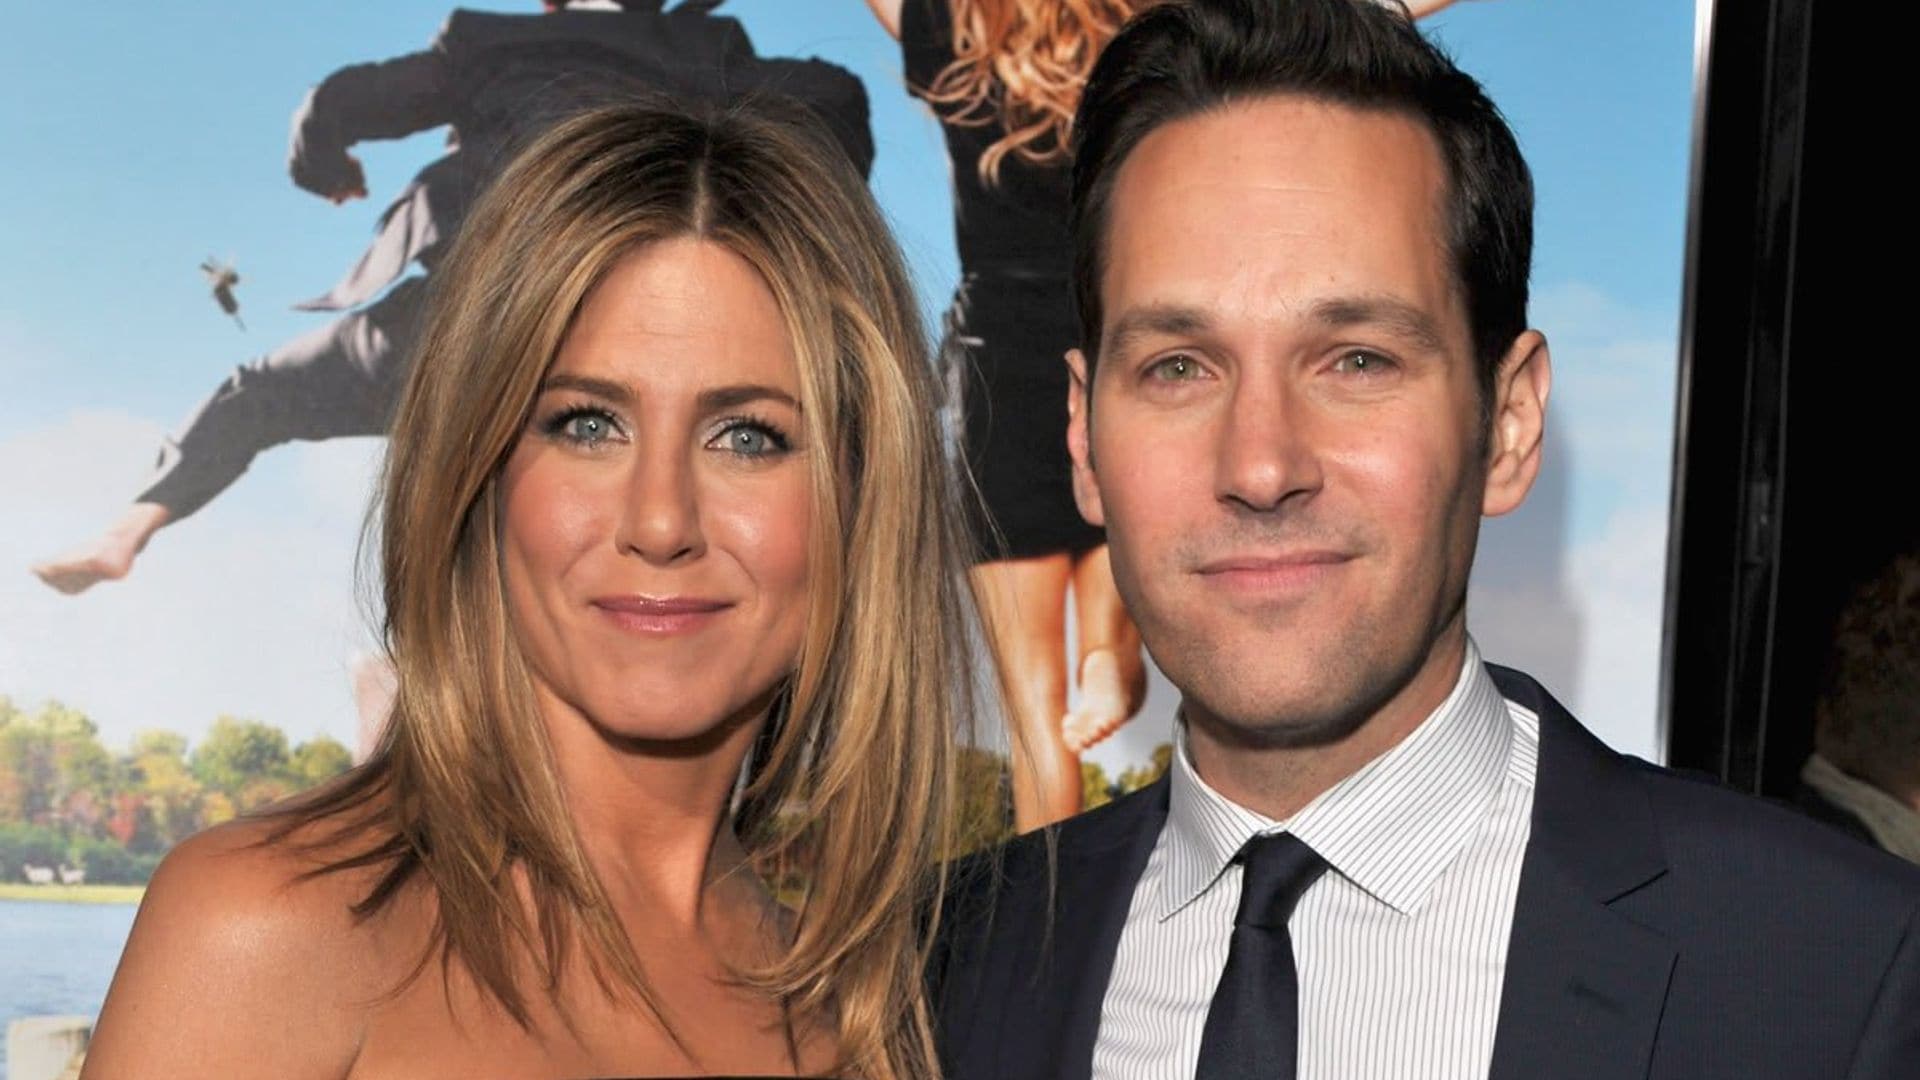 Jennifer Aniston reacts to Paul Rudd’s Sexiest Man Alive title: ‘We still love you’